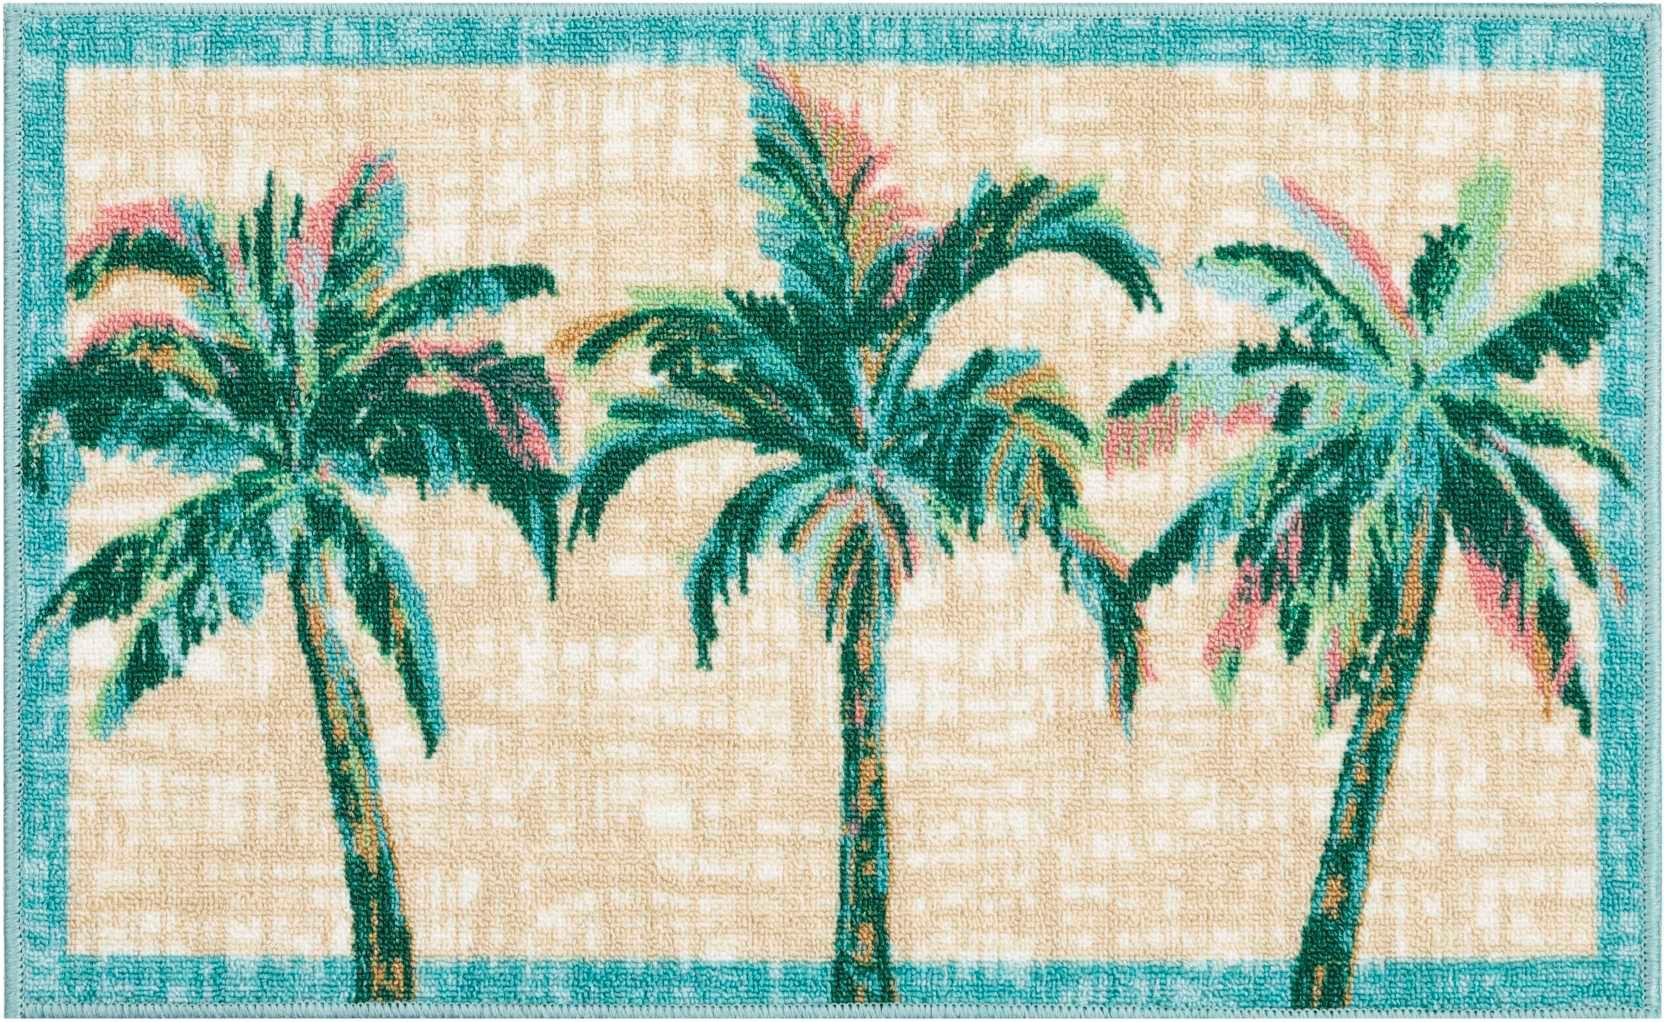 Nourison Three Palm Trees Accent Rug